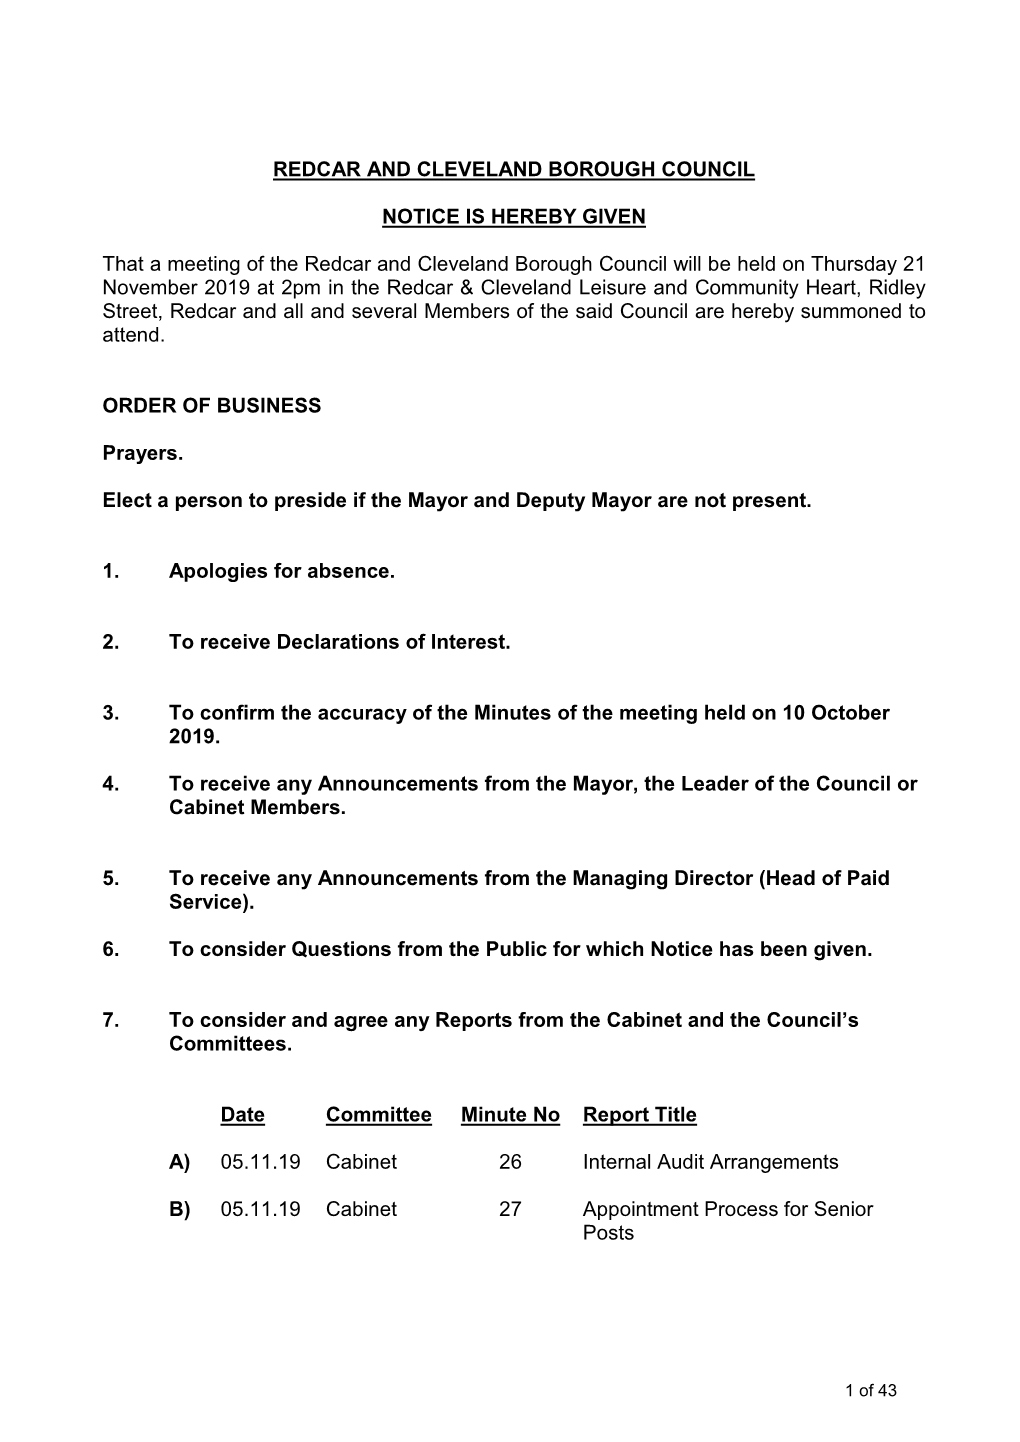 REDCAR and CLEVELAND BOROUGH COUNCIL NOTICE IS HEREBY GIVEN That a Meeting of the Redcar and Cleveland Borough Council Will Be H